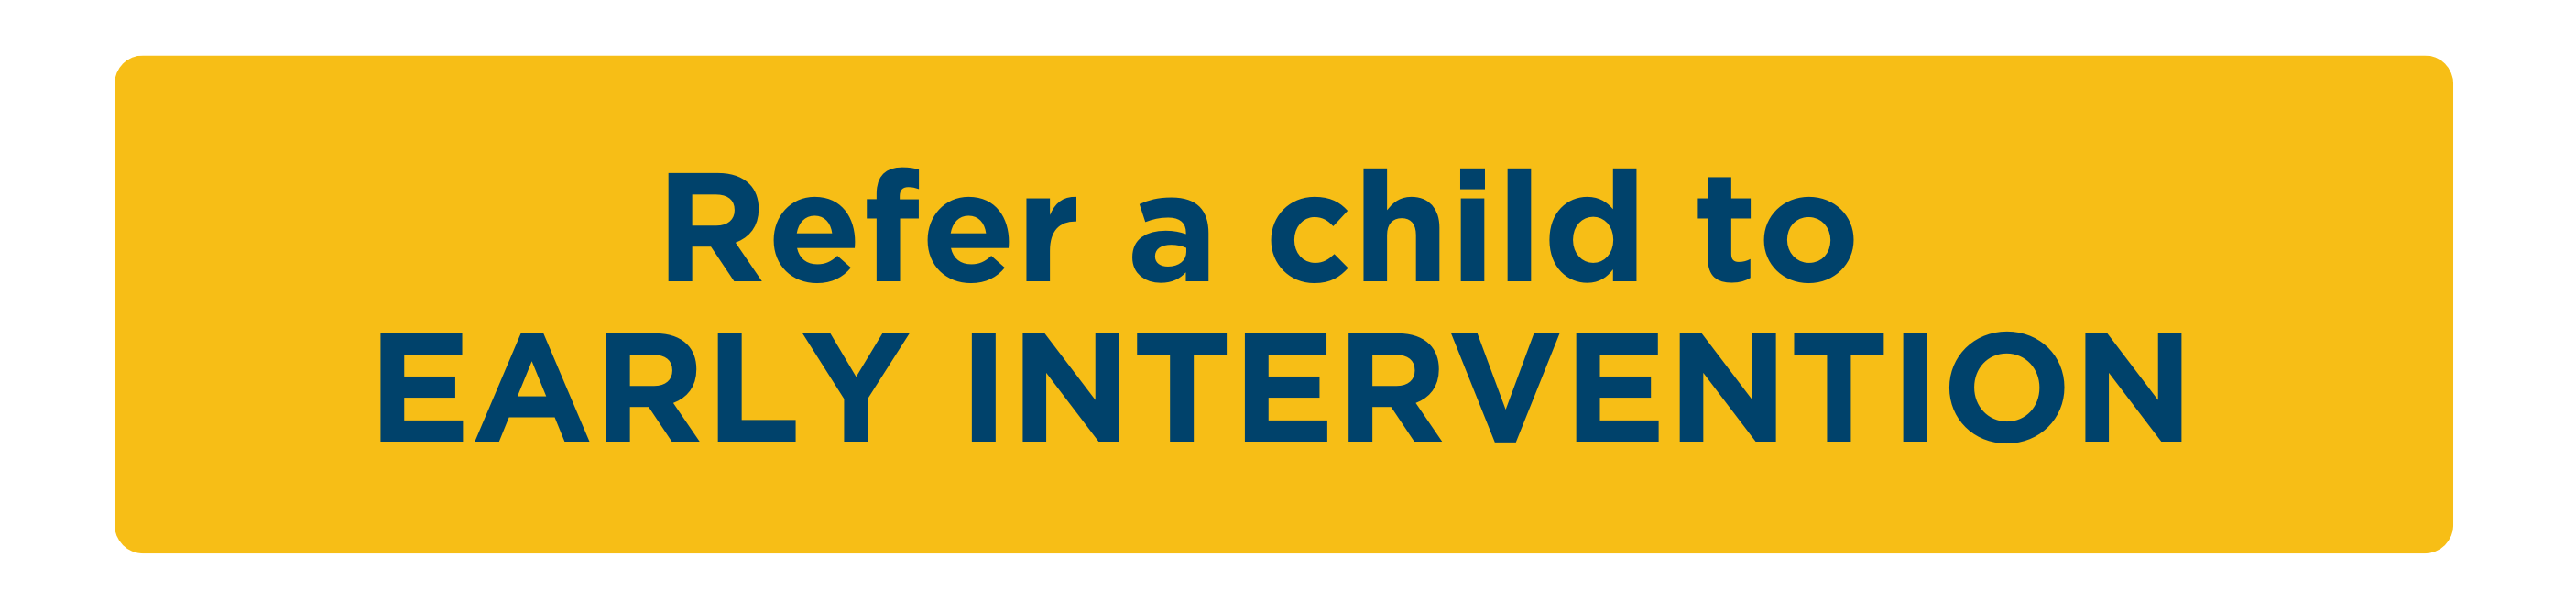 Refer a child to Early Intervention